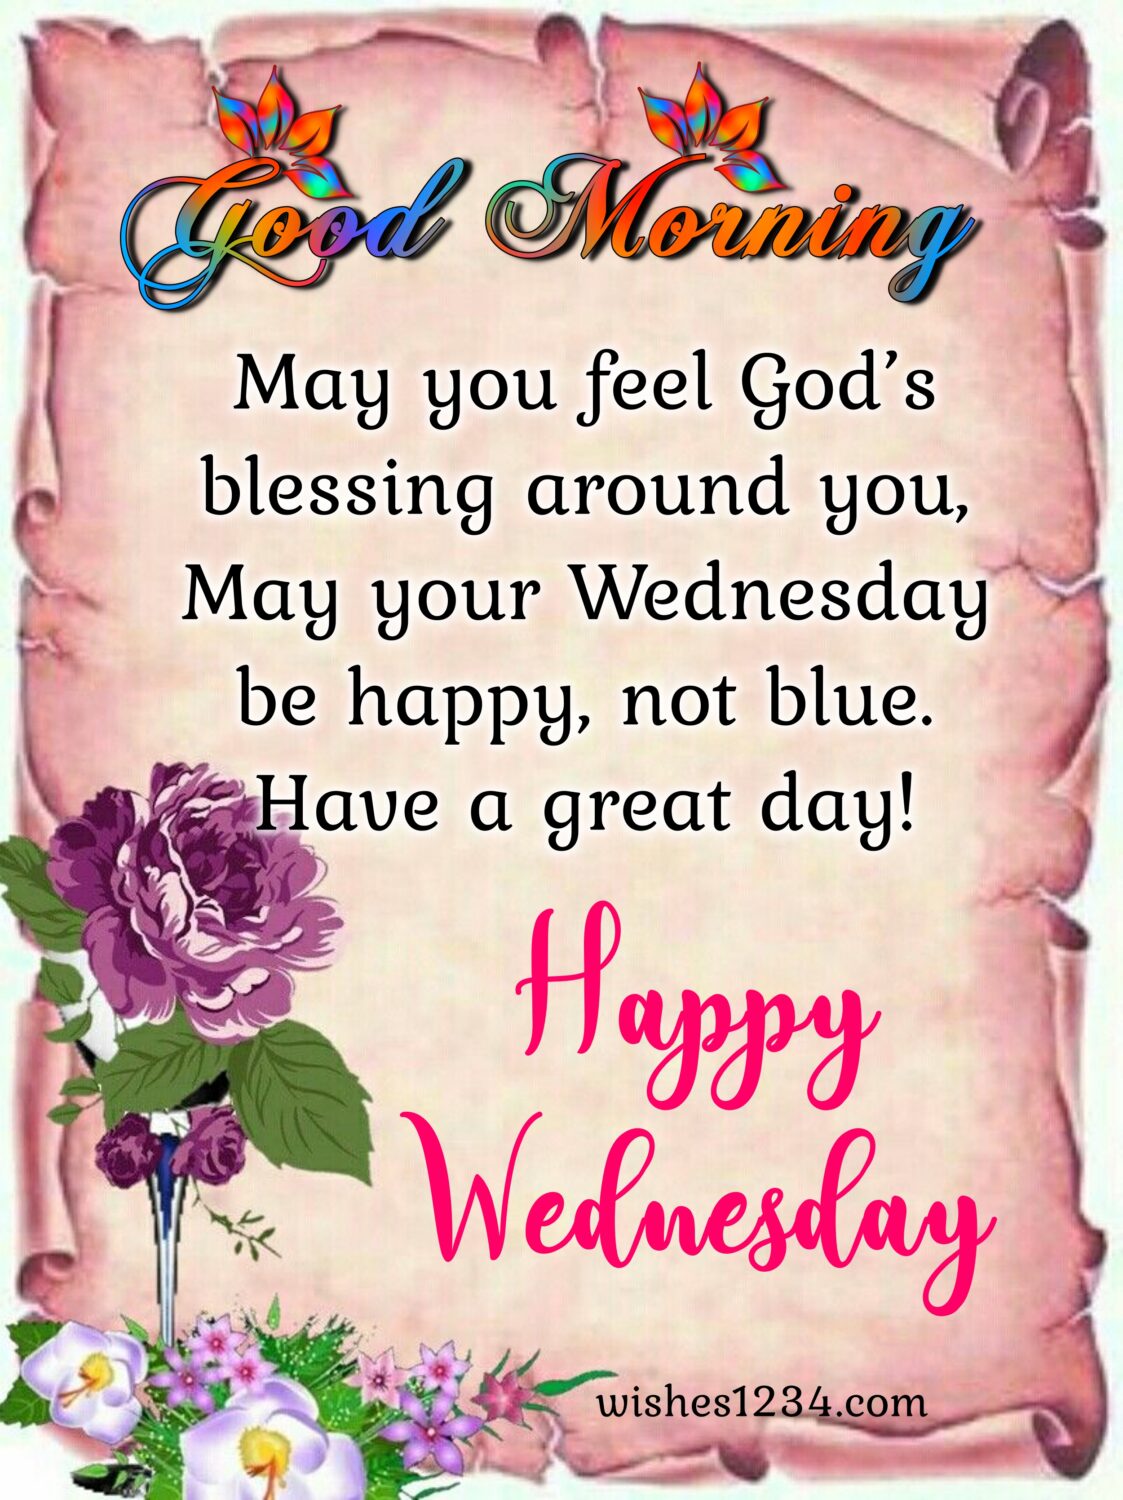 Wednesday quotes with Old perchament wallpeper with flower design, Wednesday quotes.